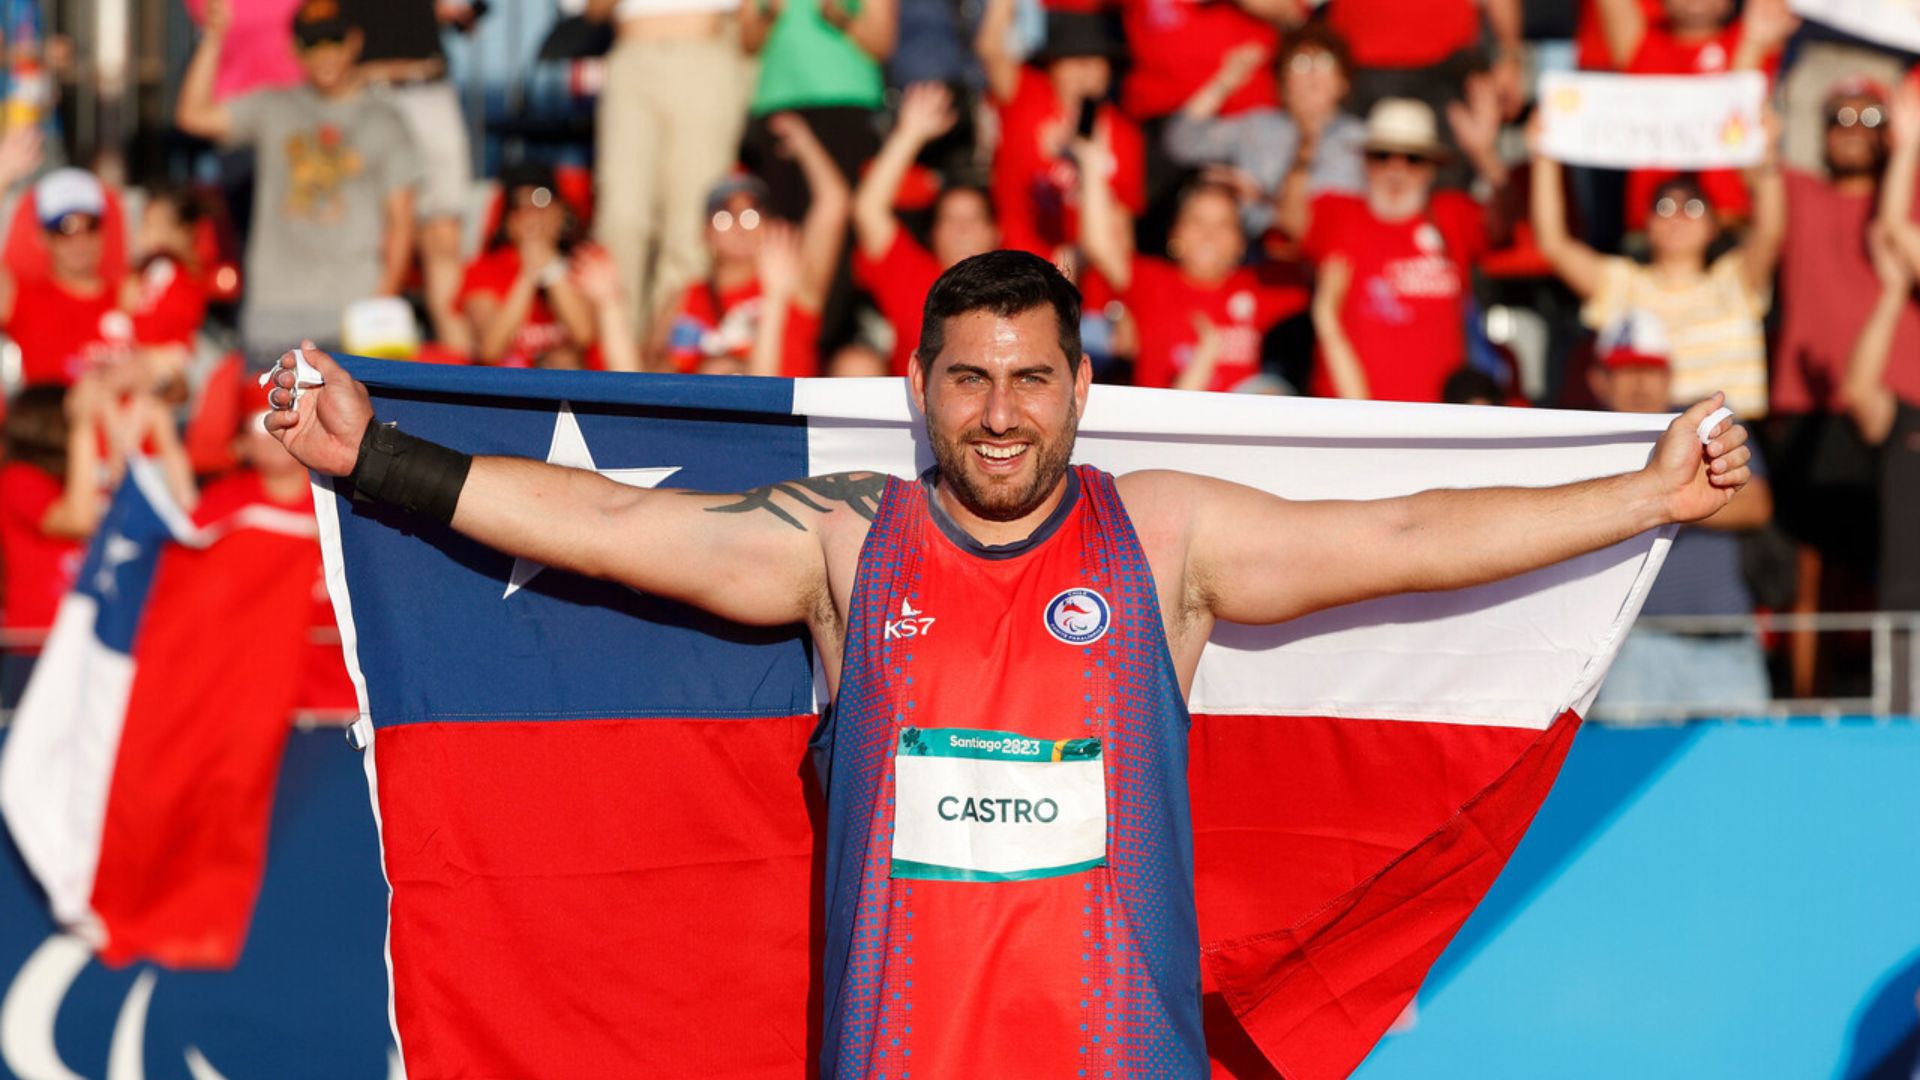 Chile Reaches 40 Medals at the Parapan American Games Santiago 2023